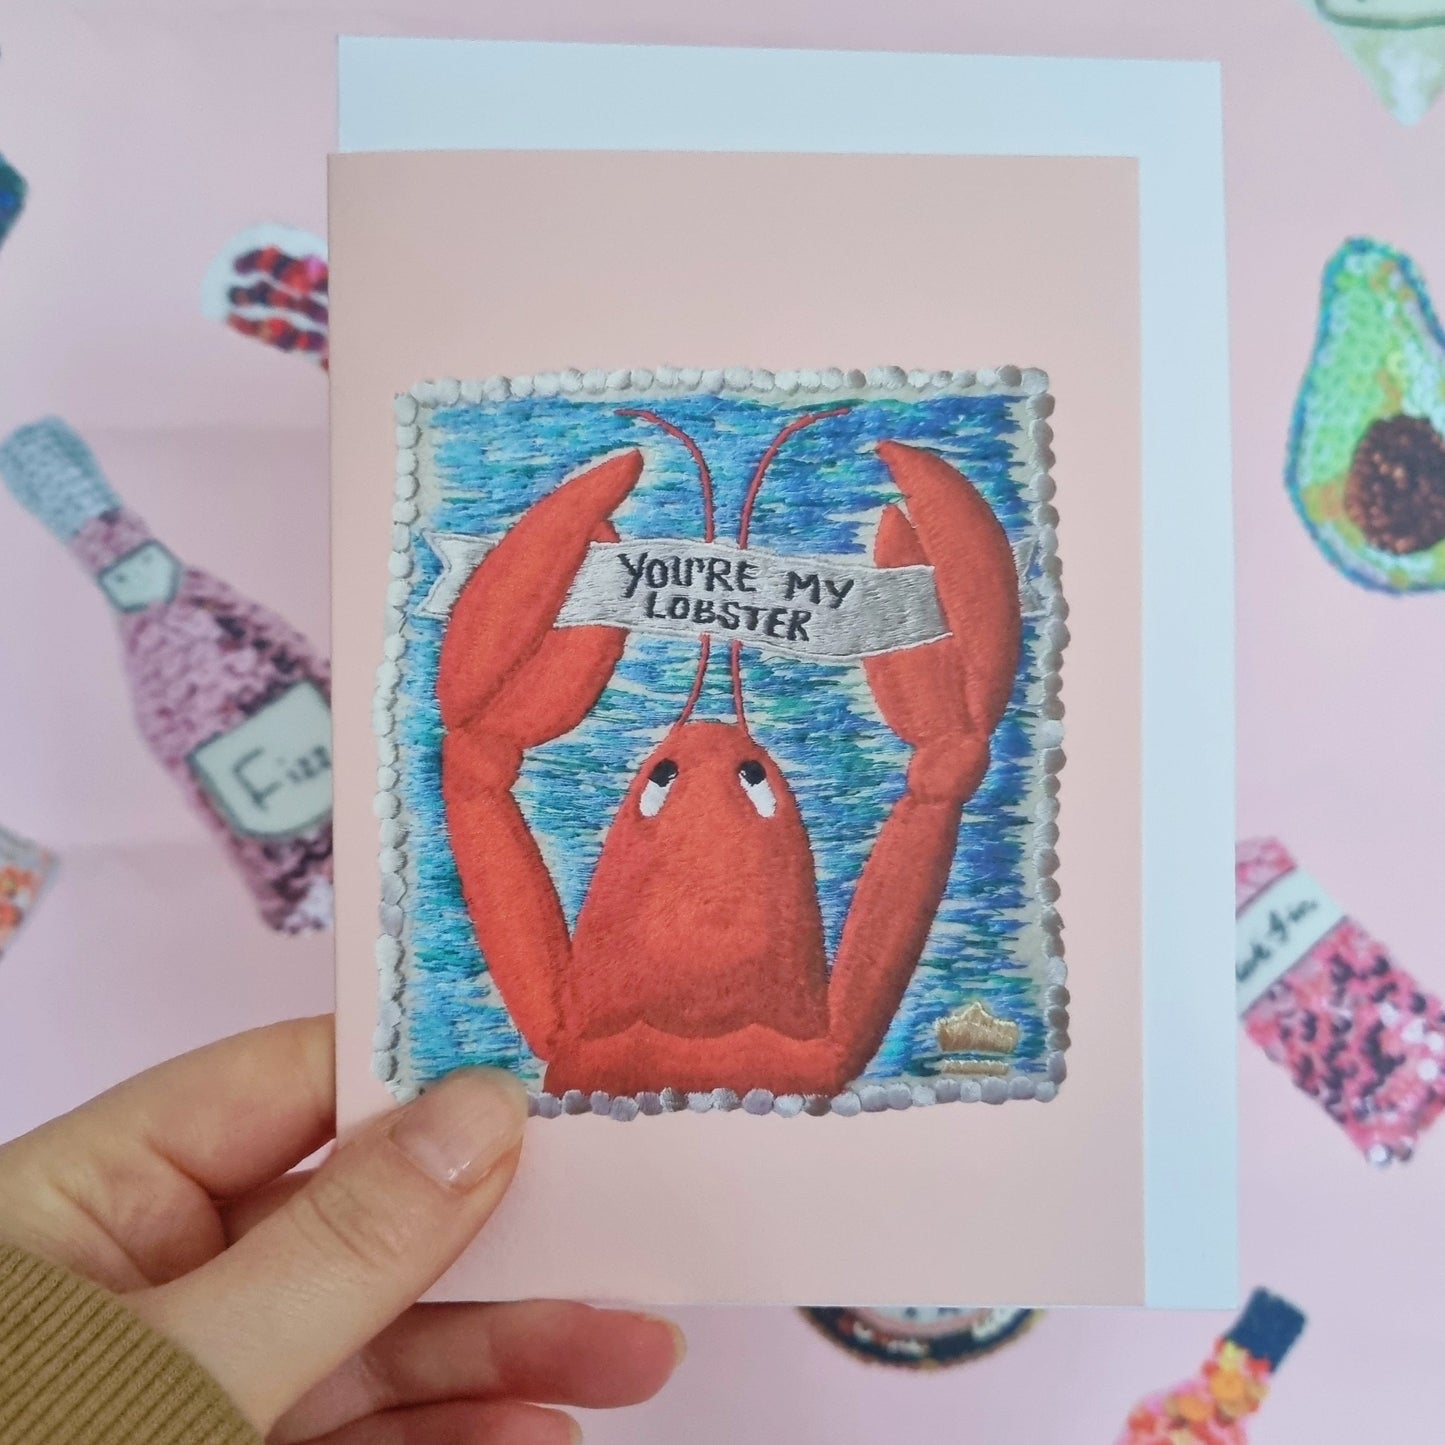 Kate's hand holding a pale pink card with an image of an embroidered lobster holding a banner saying "You're my Lobster"